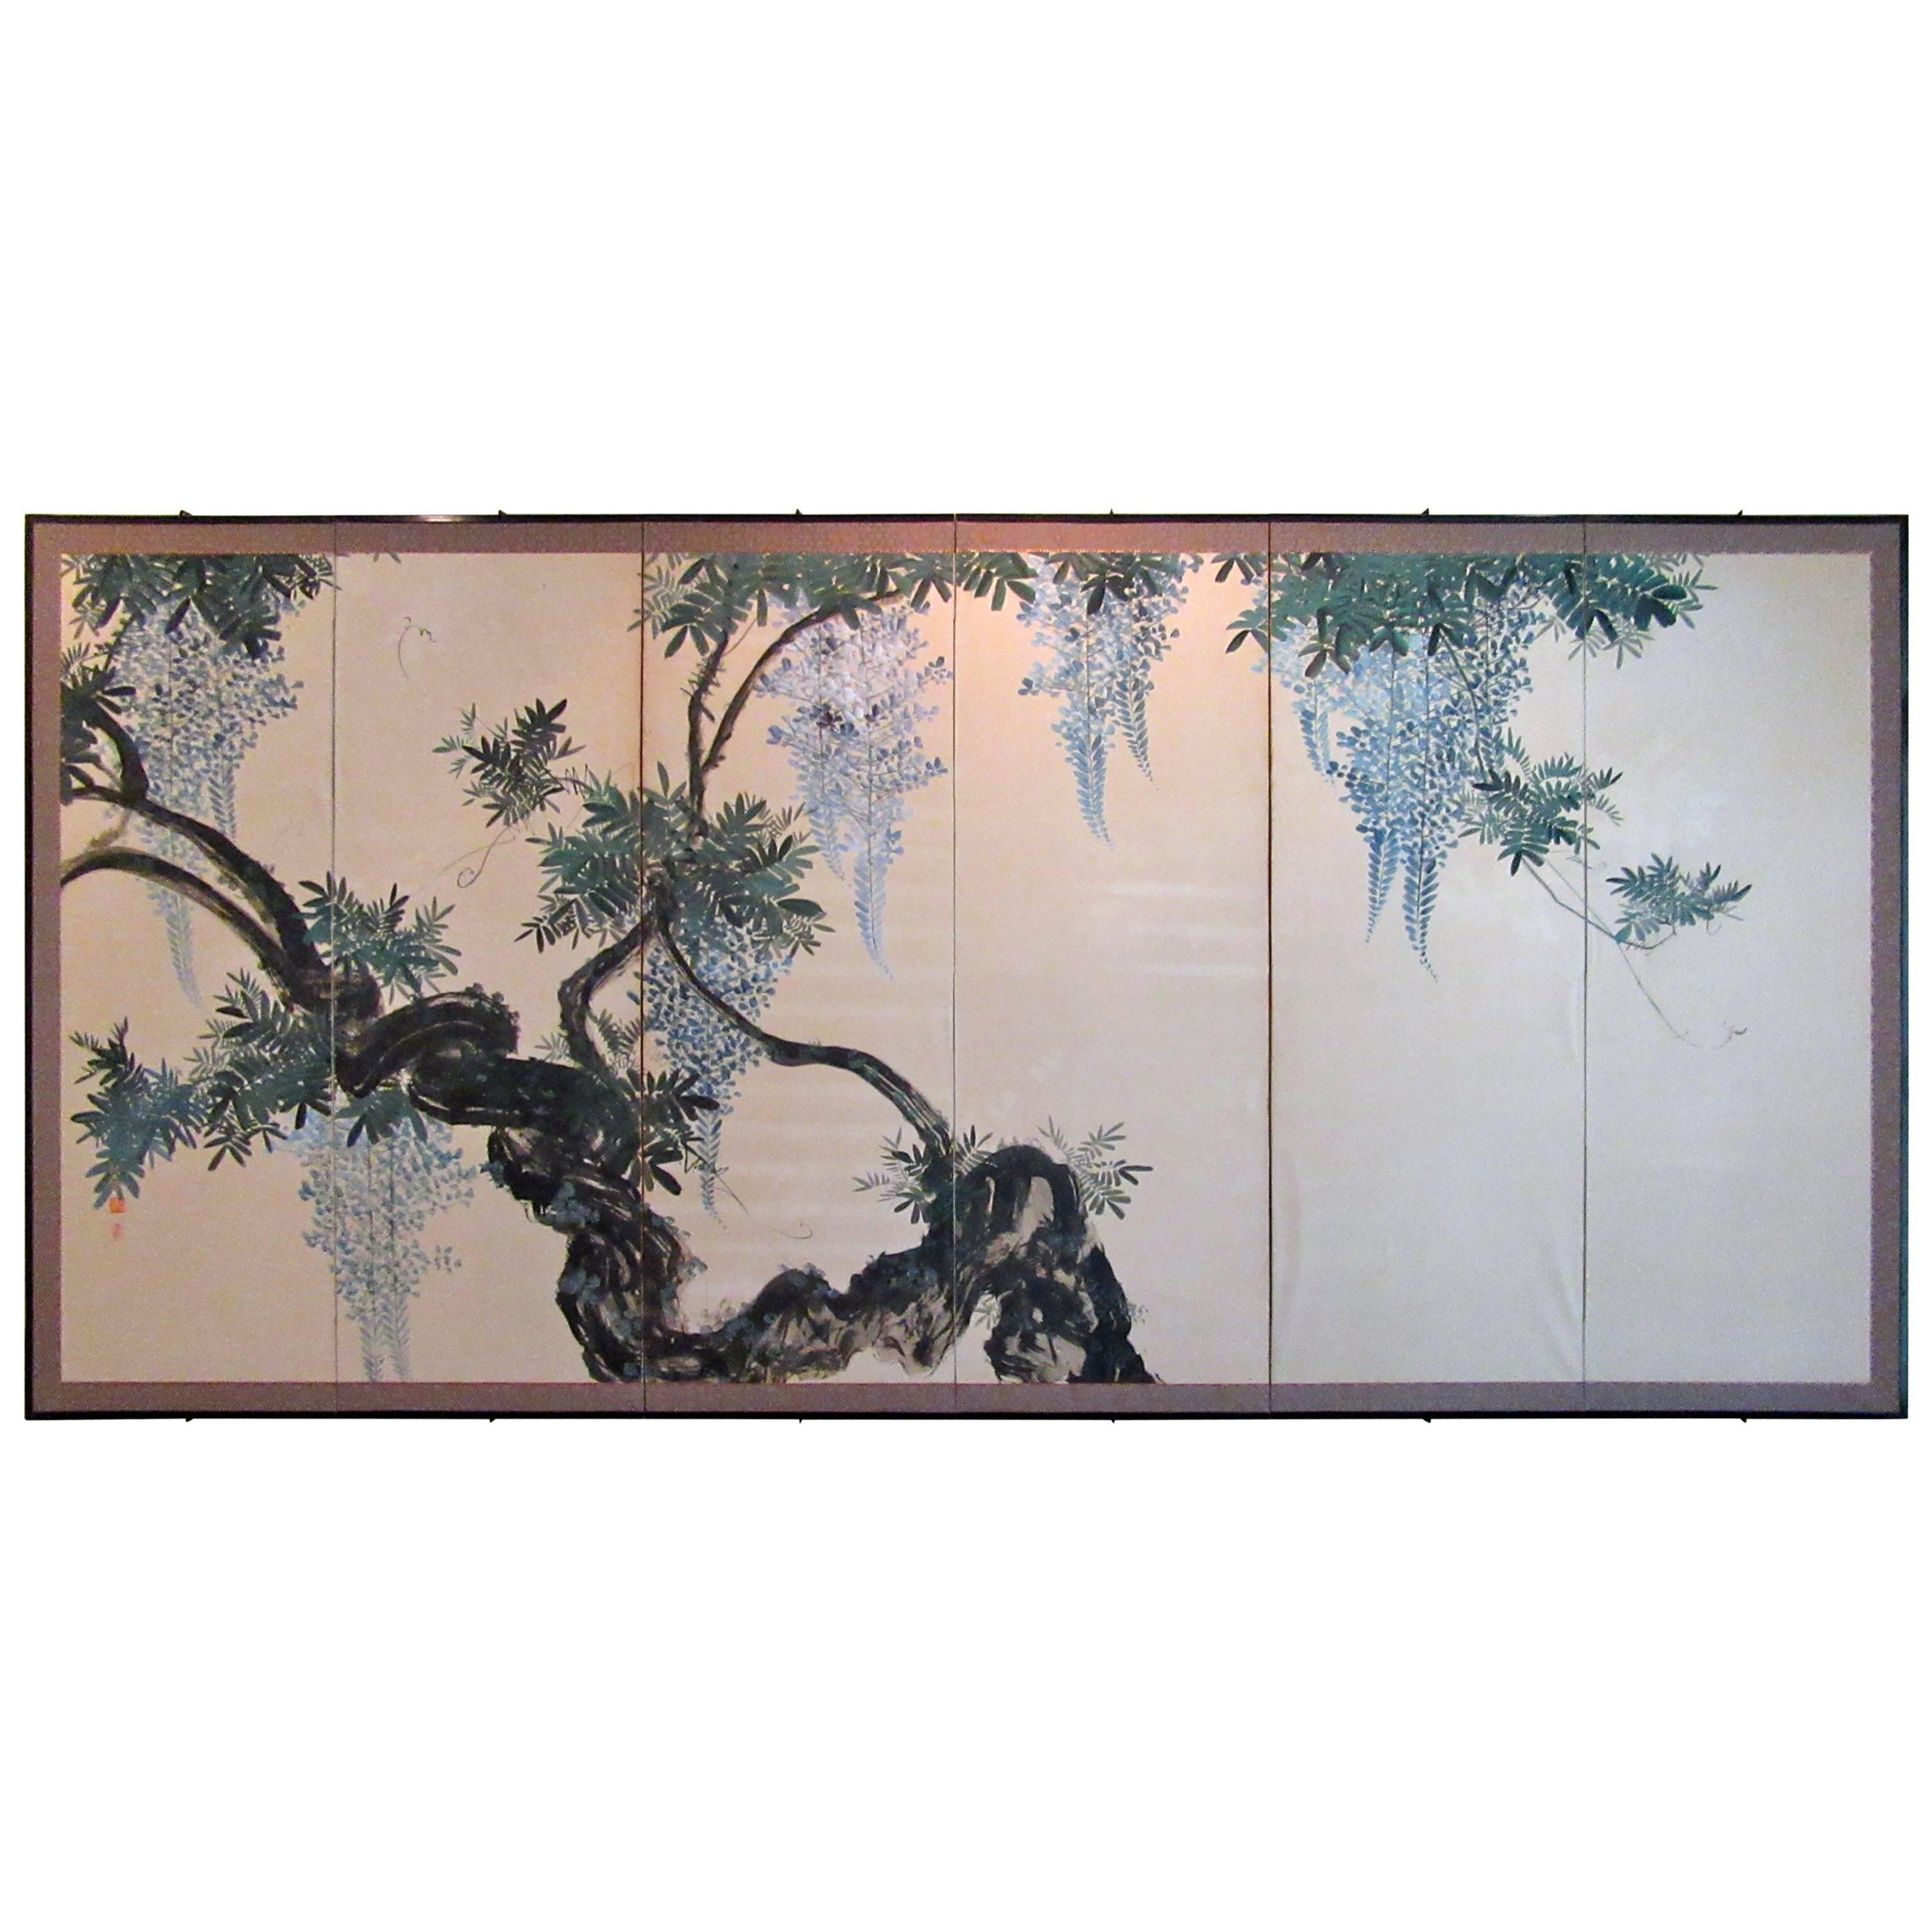 Japanese Six-Panel Screen, "Wisteria in Bloom"